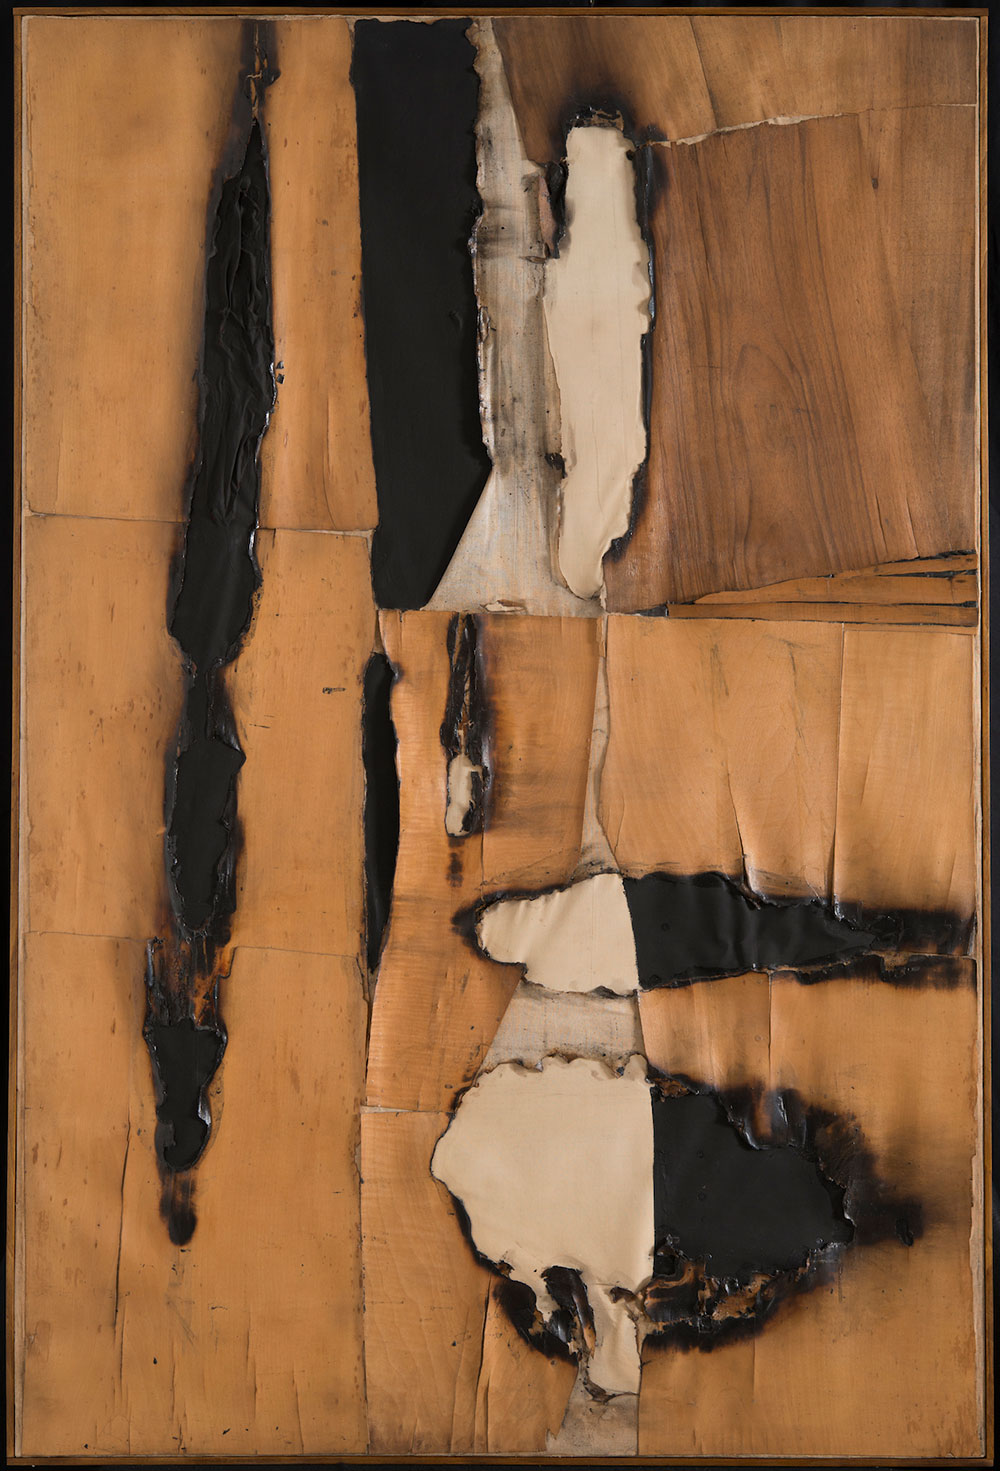 Alberto Burri, “Combustione legno (Wood Combustion)” (1957), wood veneer, paper, combustion, acrylic, and Vinavil on canvas, 149.5 x 99 cm